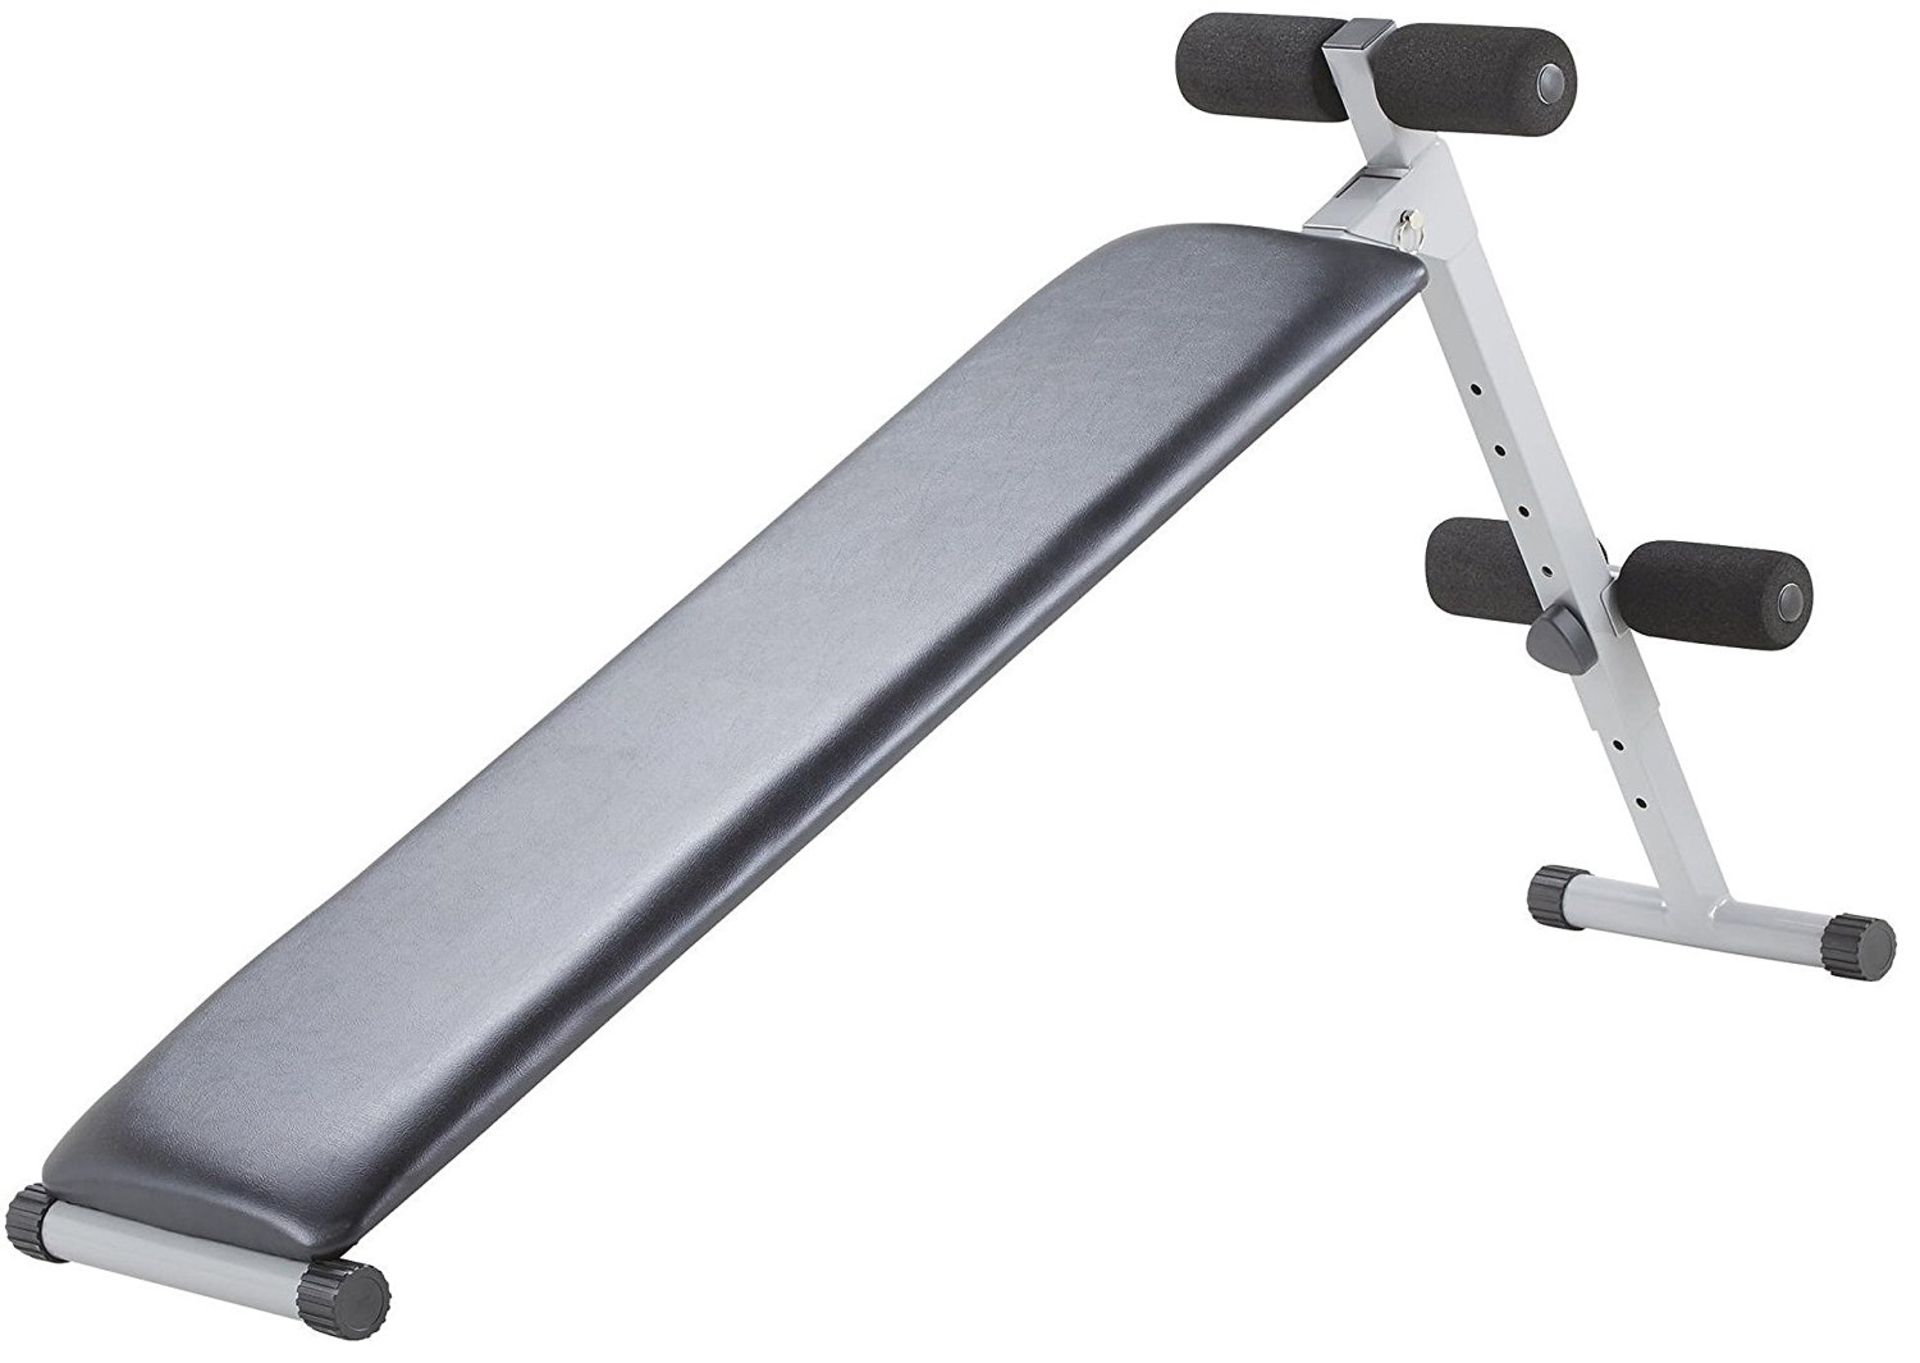 V Brand New 2 in 1 Incline/Sit Up Bench - Tesco Price £35.00 - Image 2 of 6